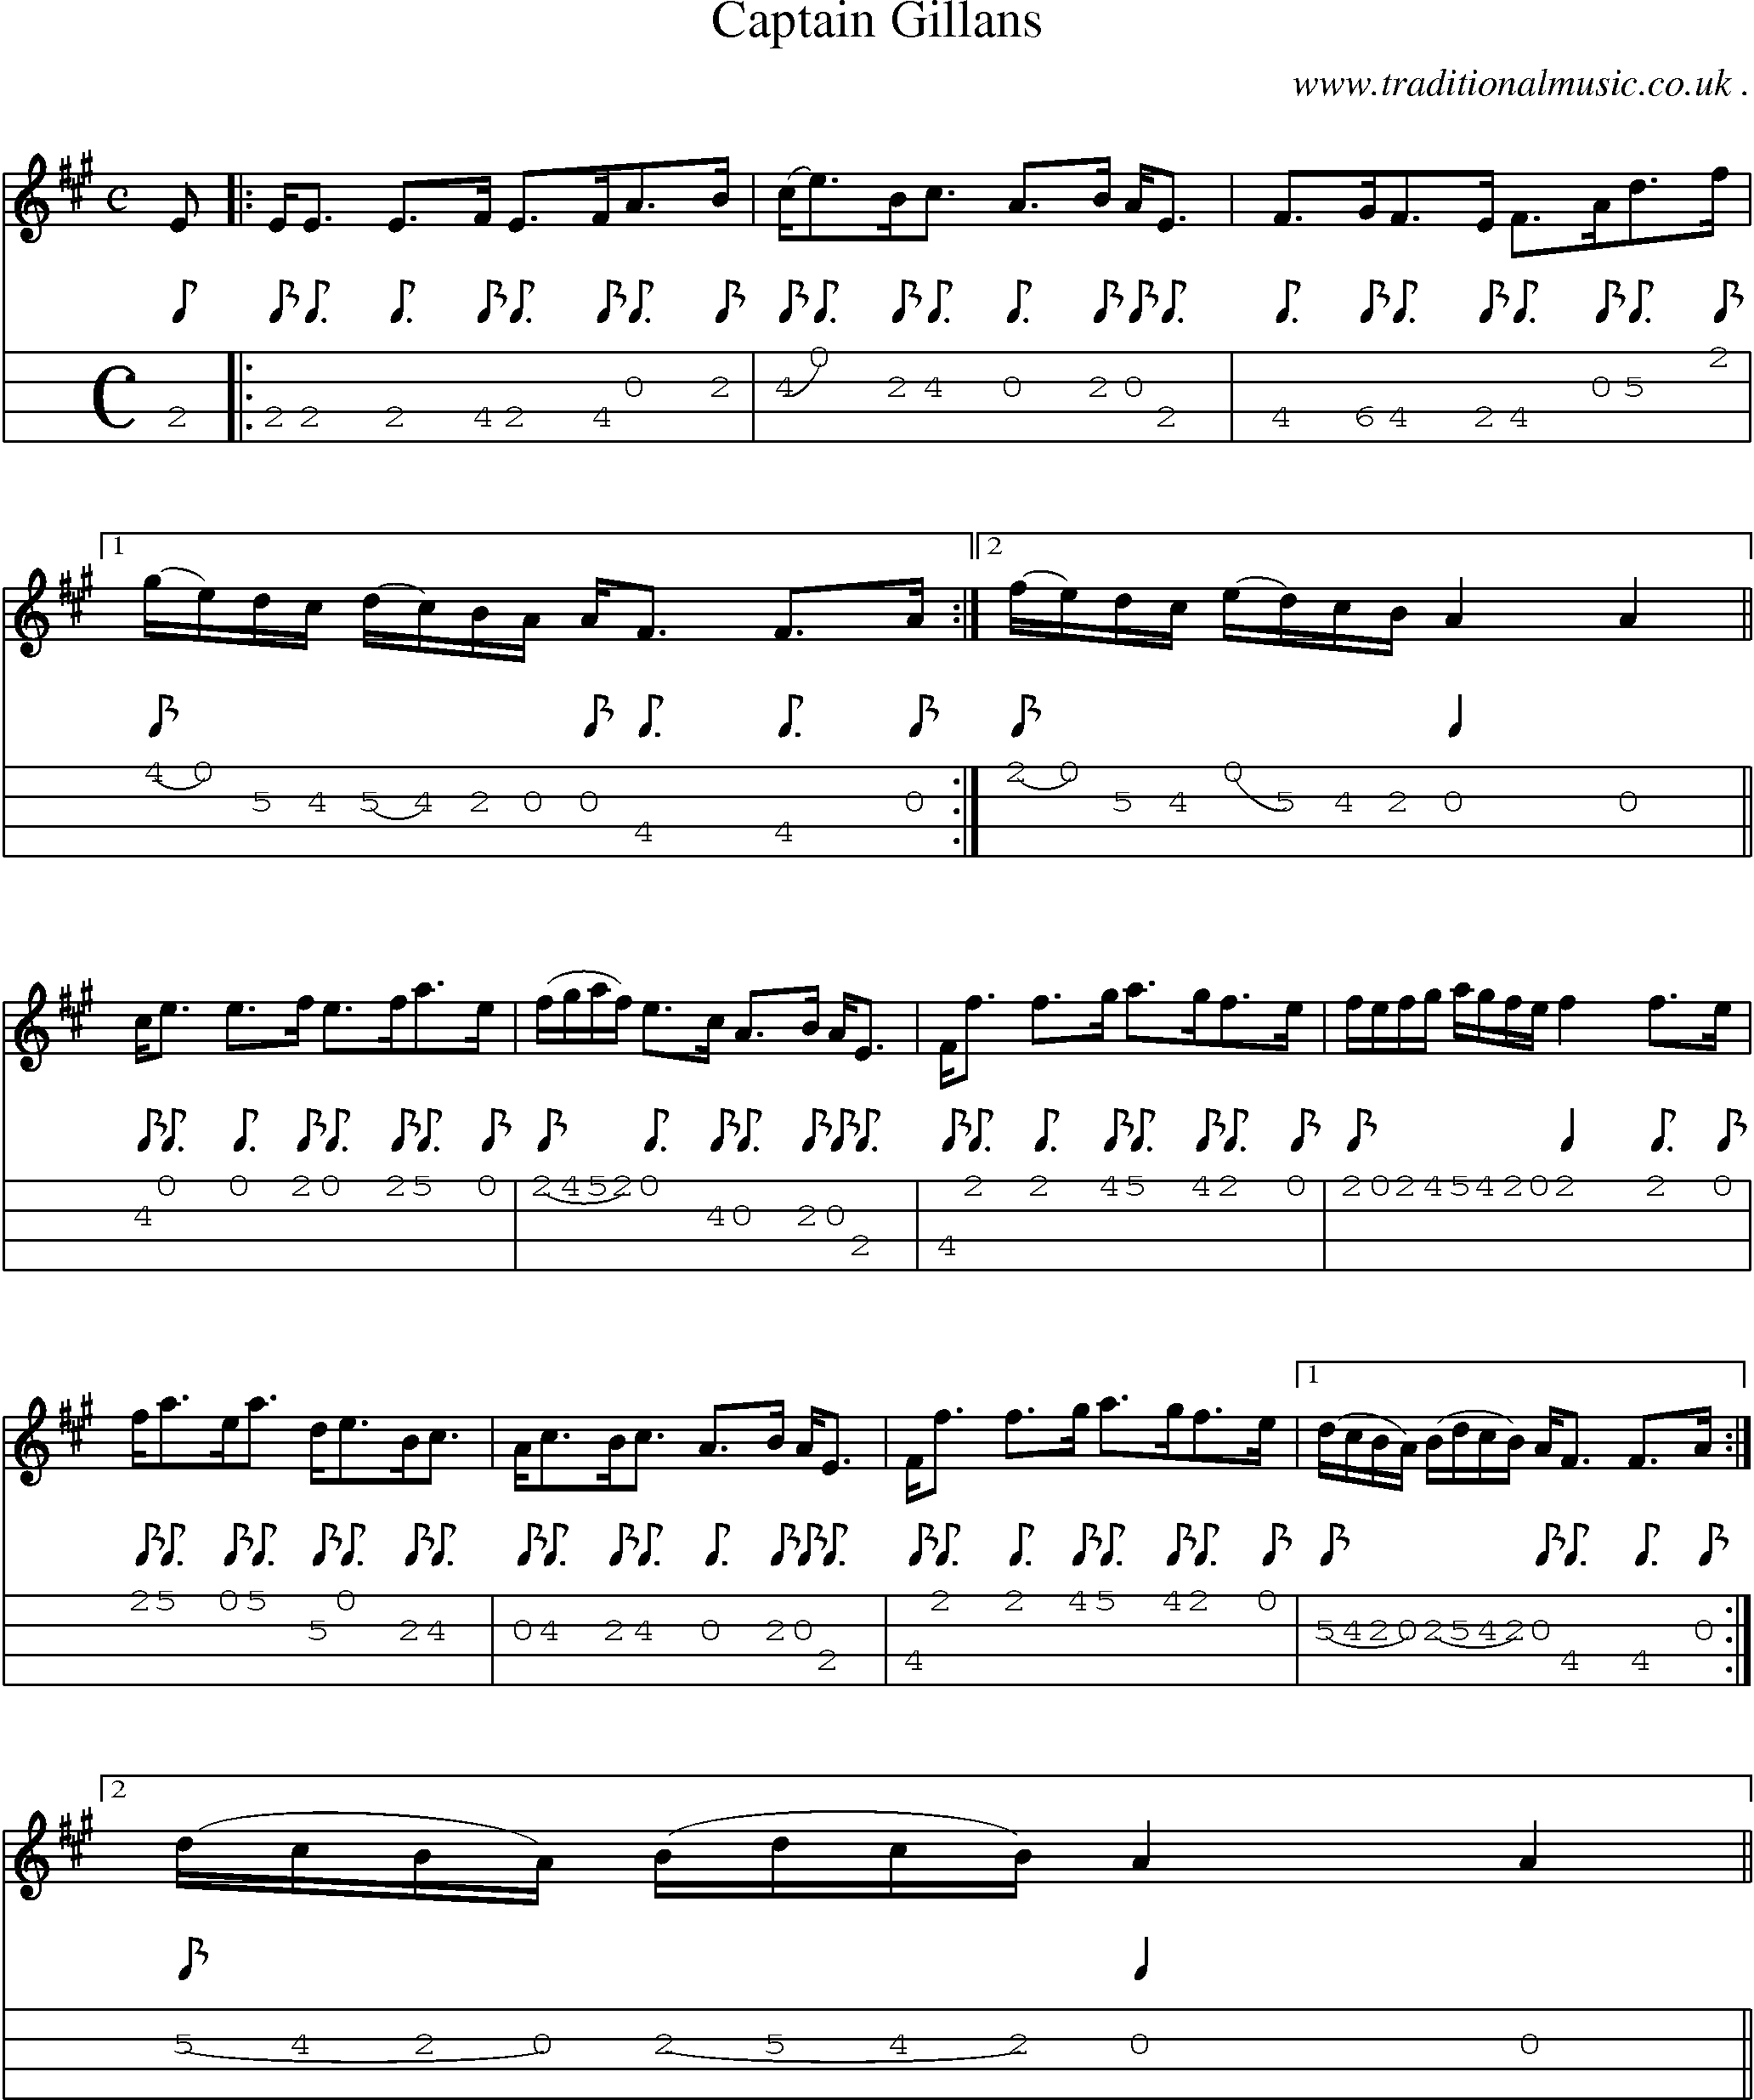 Sheet-music  score, Chords and Mandolin Tabs for Captain Gillans